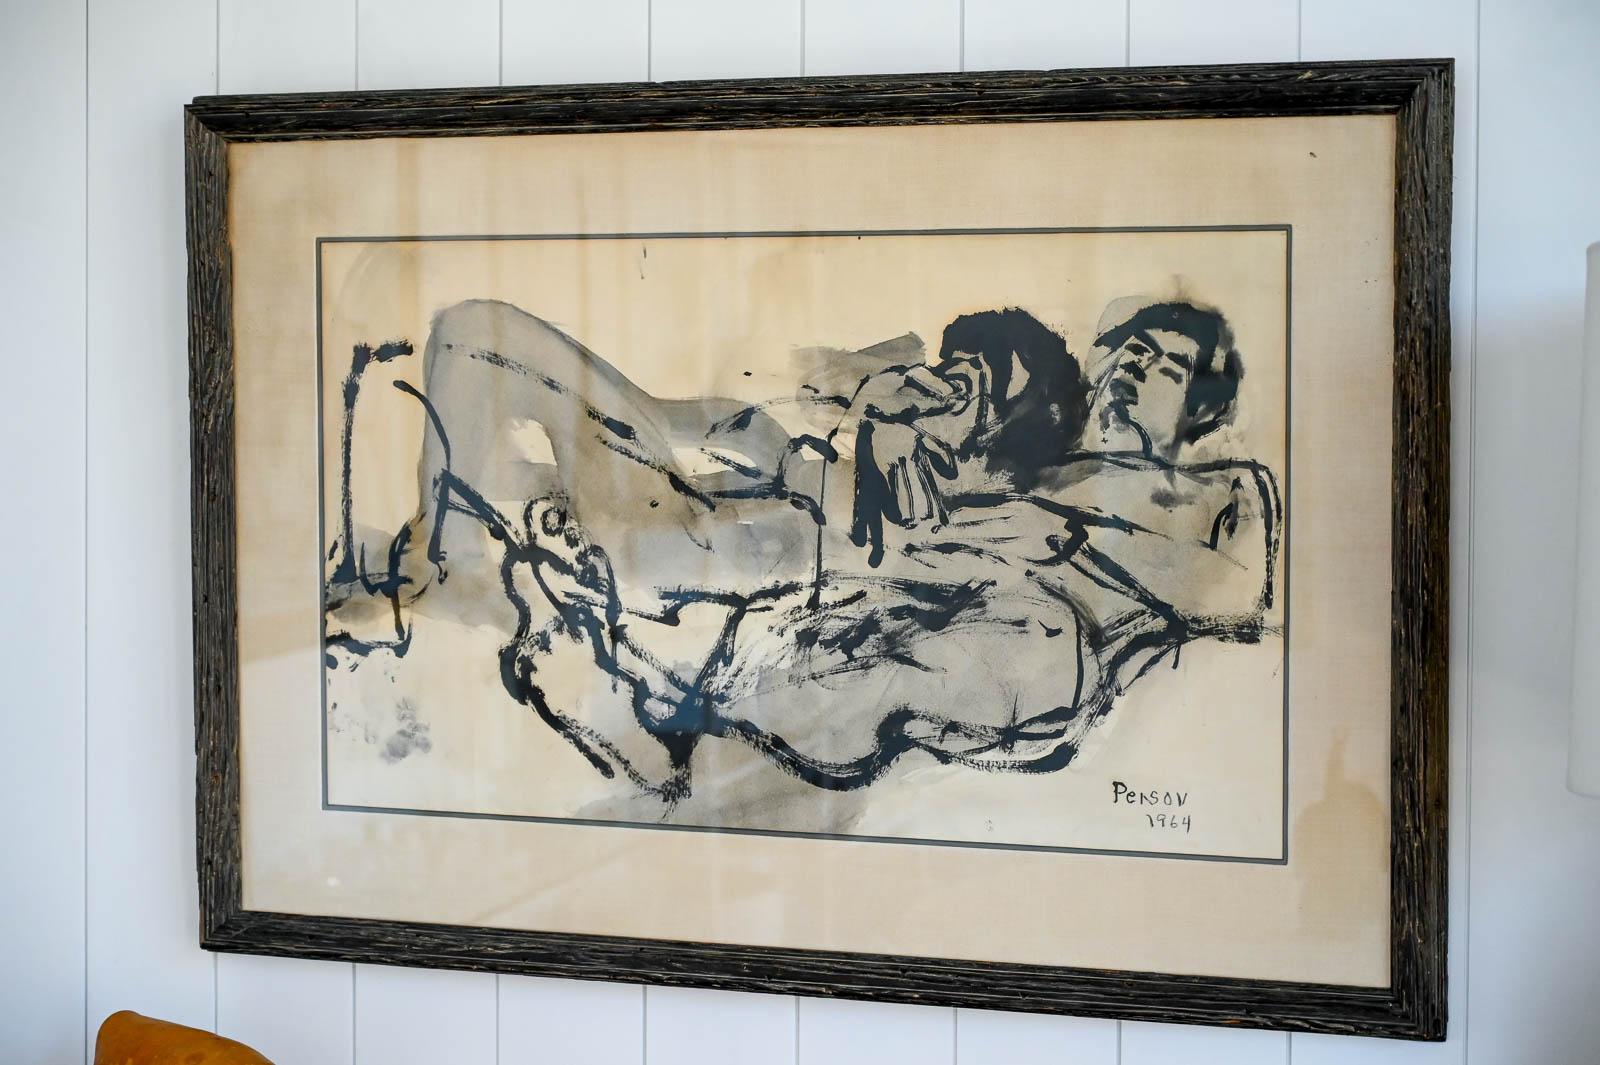 Original Figurative Watercolor by Anne Marie Persov, 1964.  Original figurative watercolor by Laguna Beach Artist Anne Marie Persov, 1964.  Acquired from the artists private collection, this piece is in its original frame and matting.  Some slight